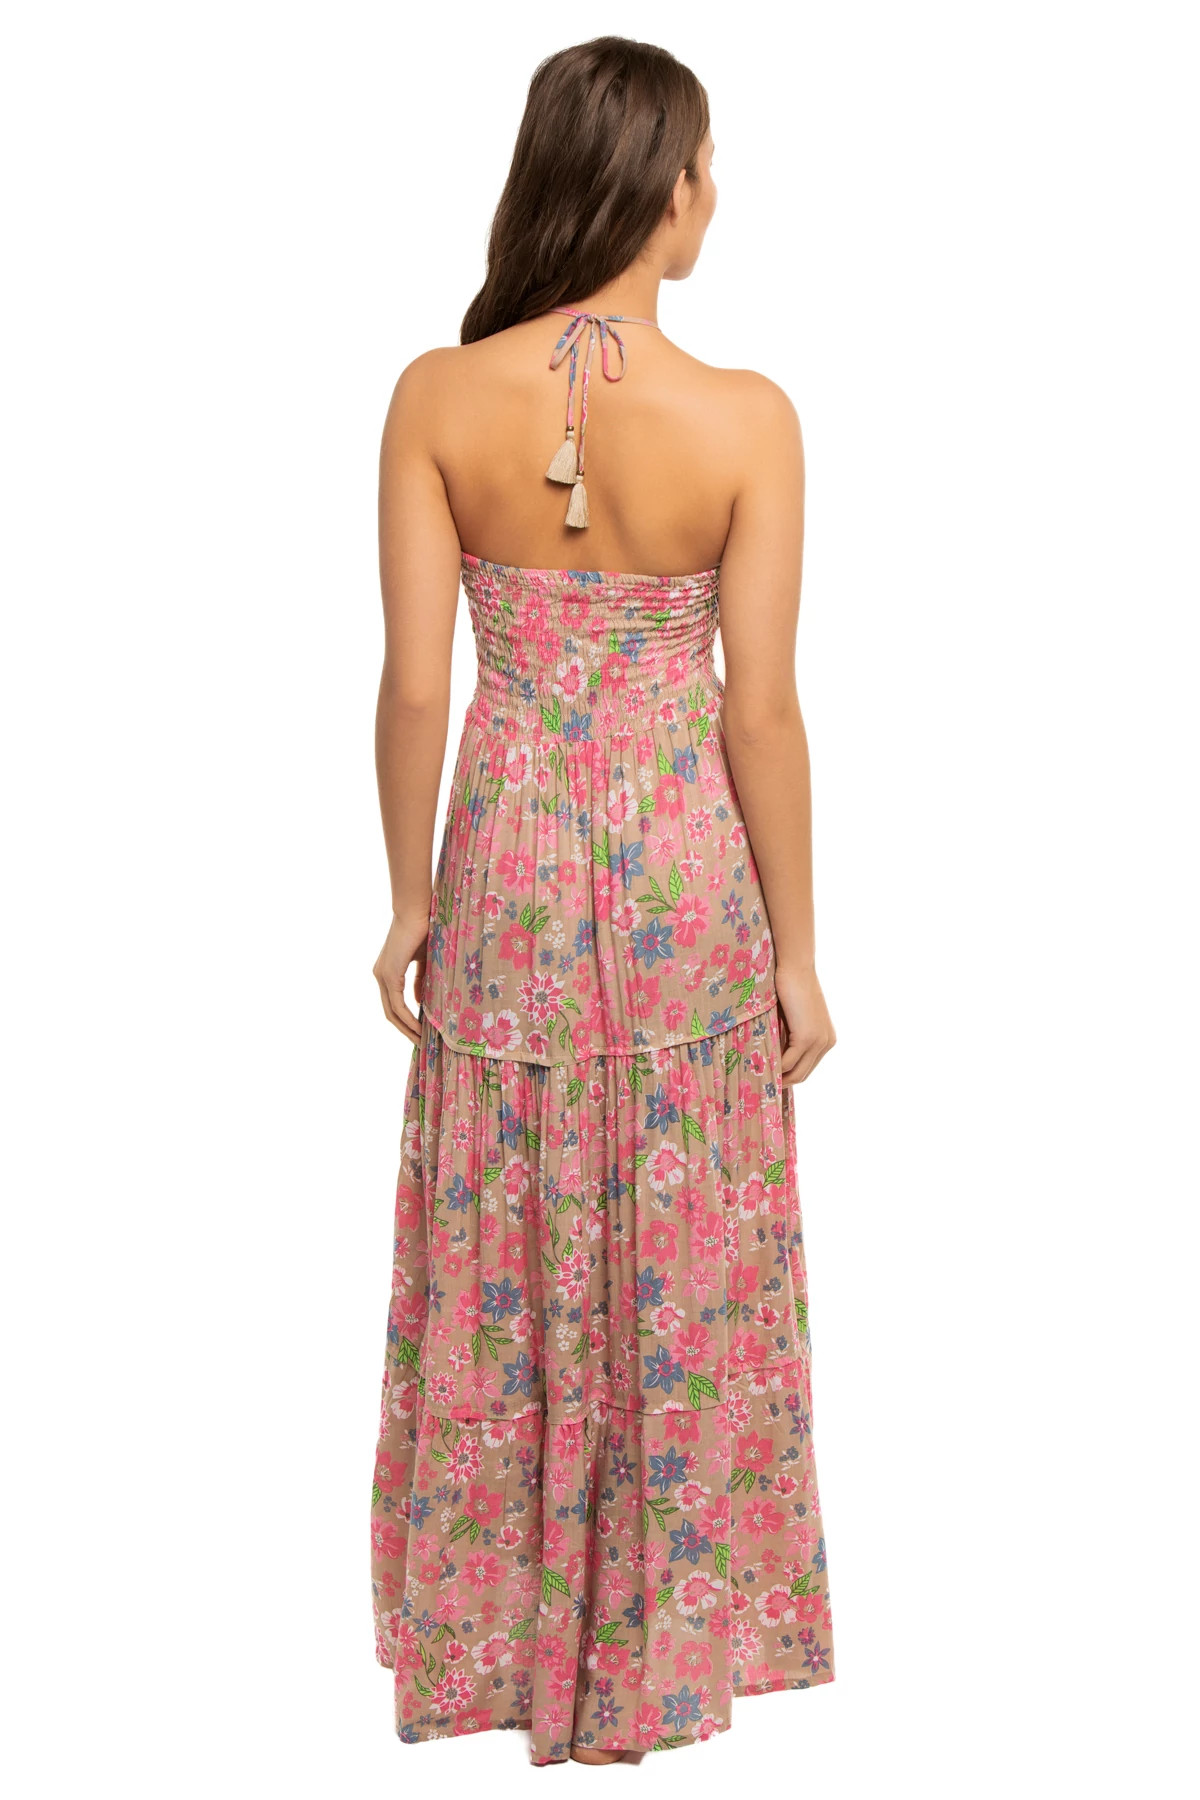 WILDFLOWERS EARTH Perth Maxi Dress image number 2